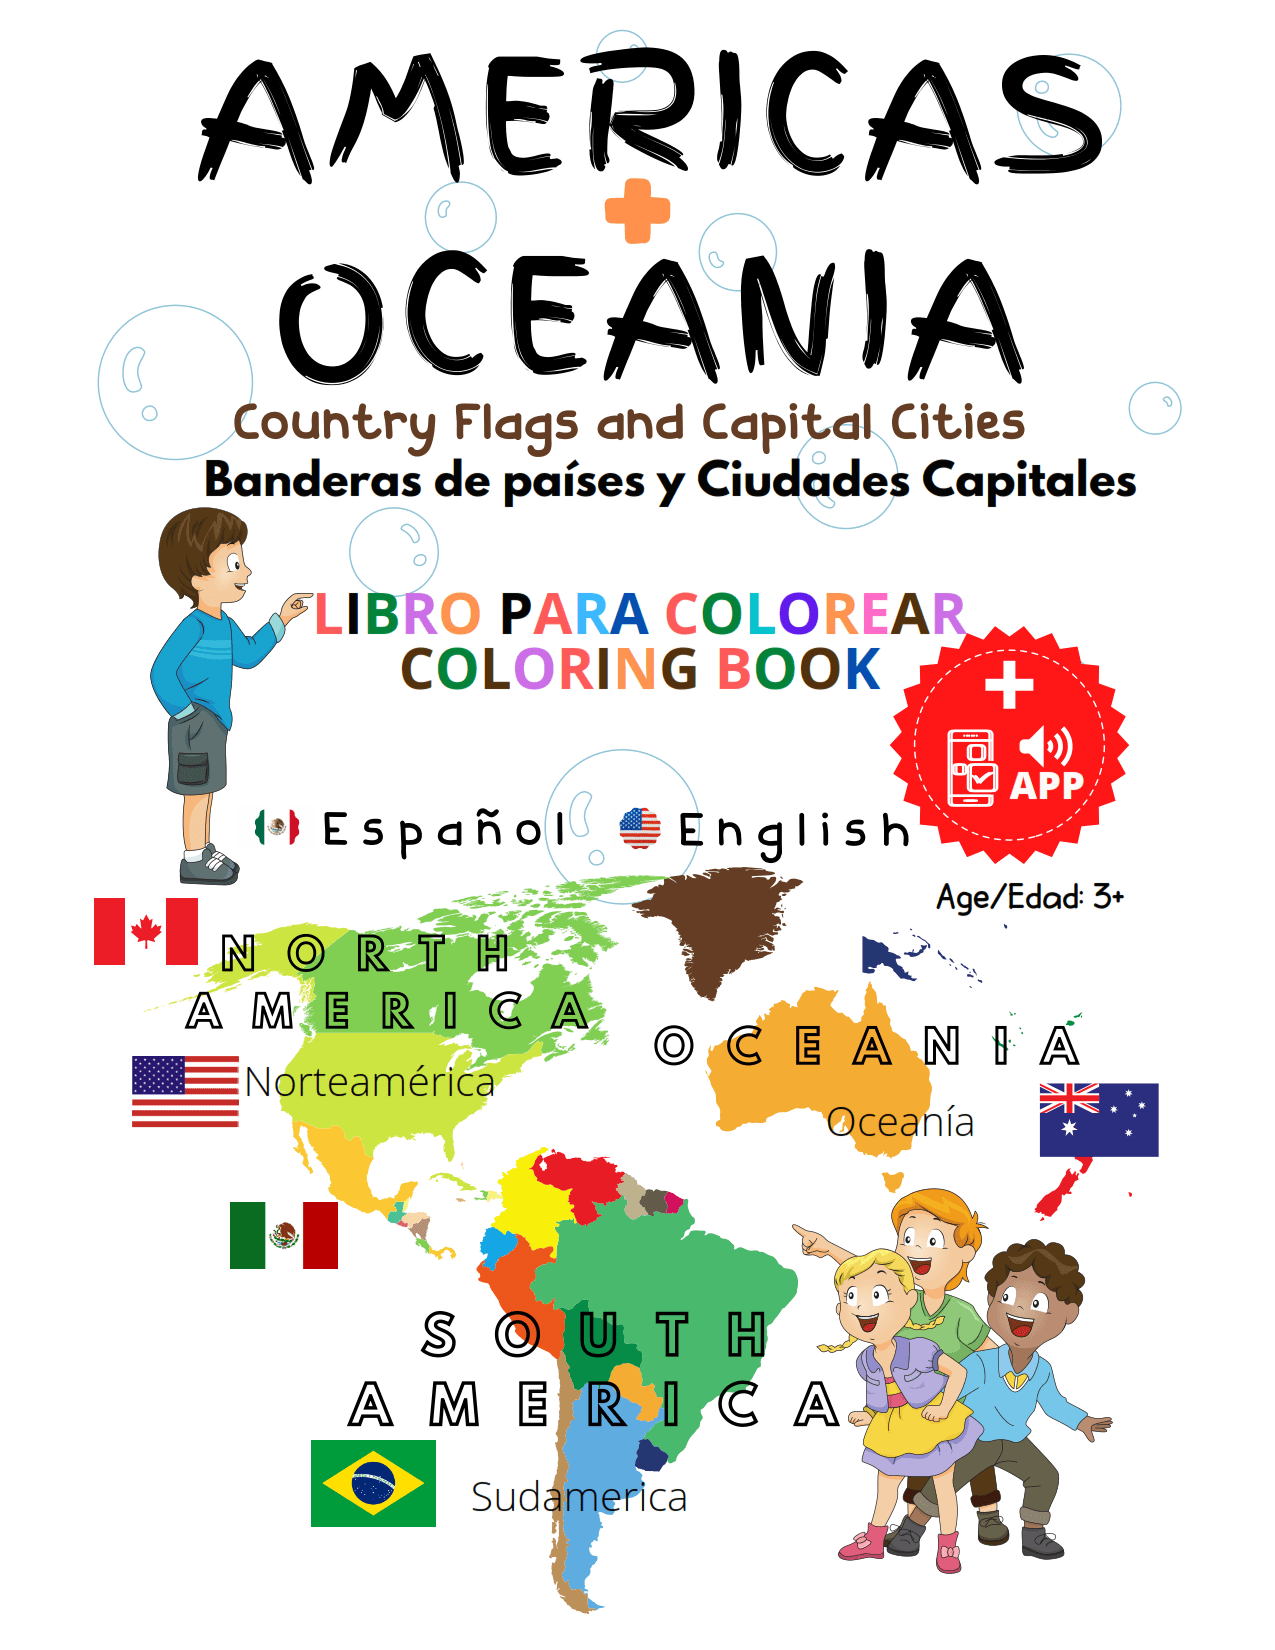 Countries flags capitals in america oceania bilingual coloring books with audio app